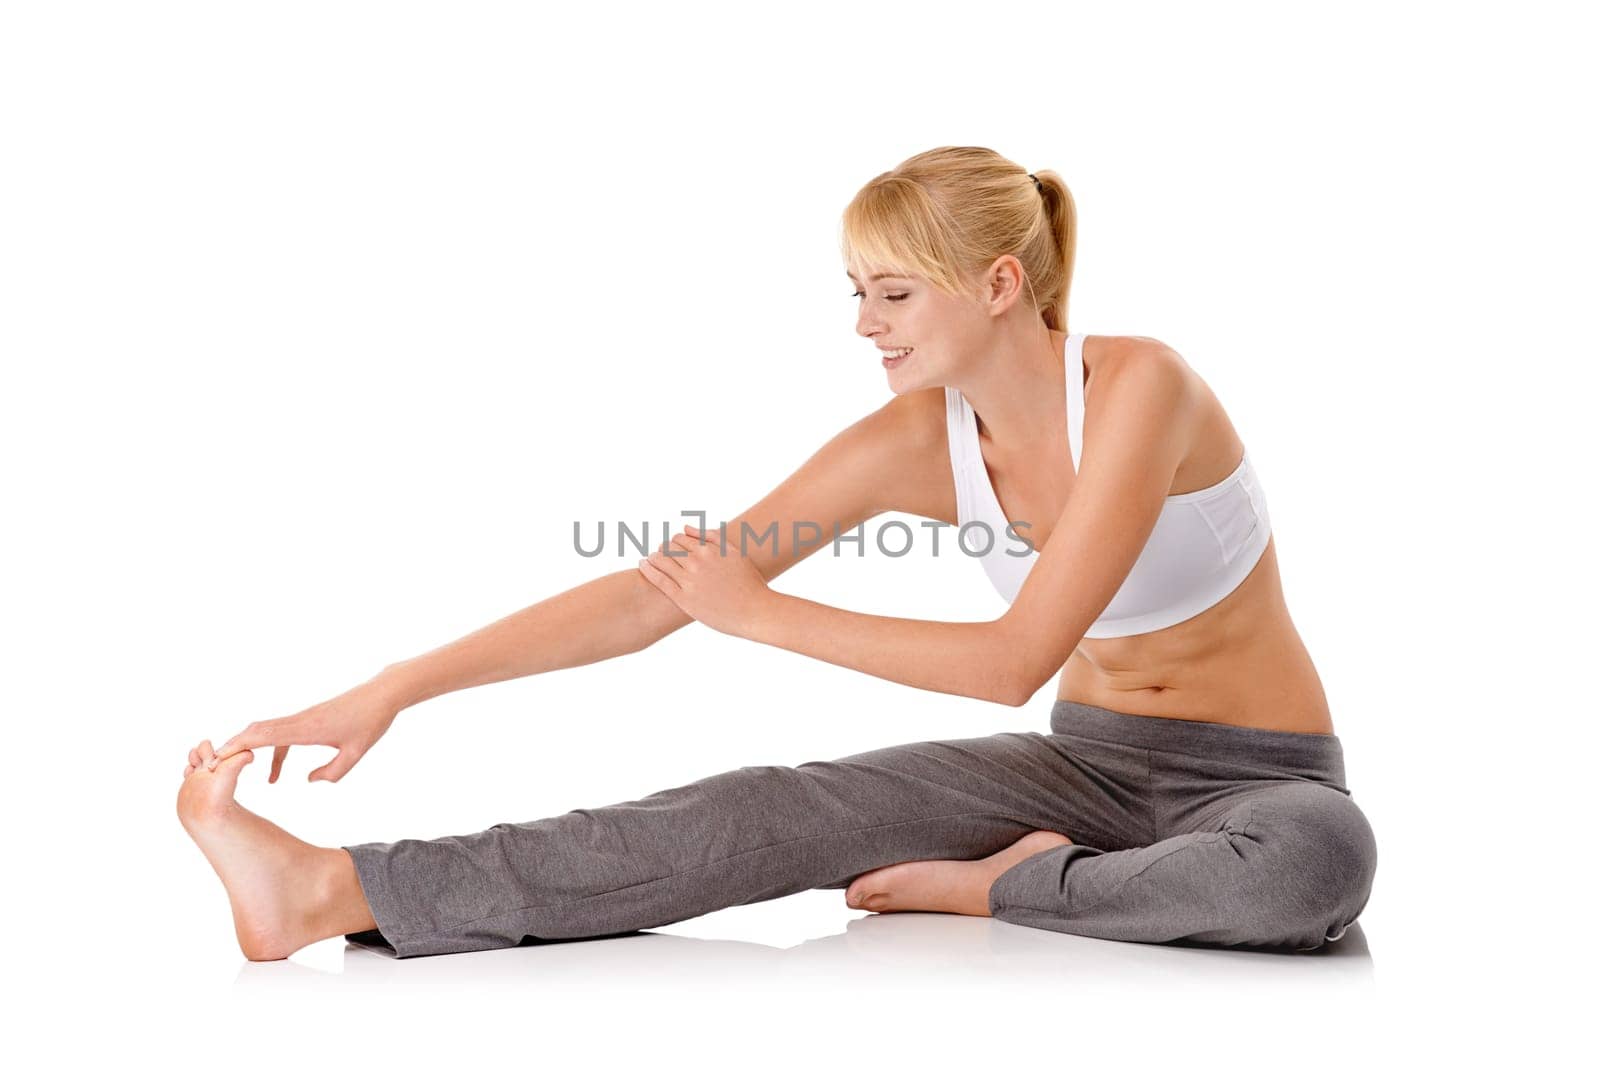 Limbering up. Full-length shot of a young woman exercising on the floor isolated on white